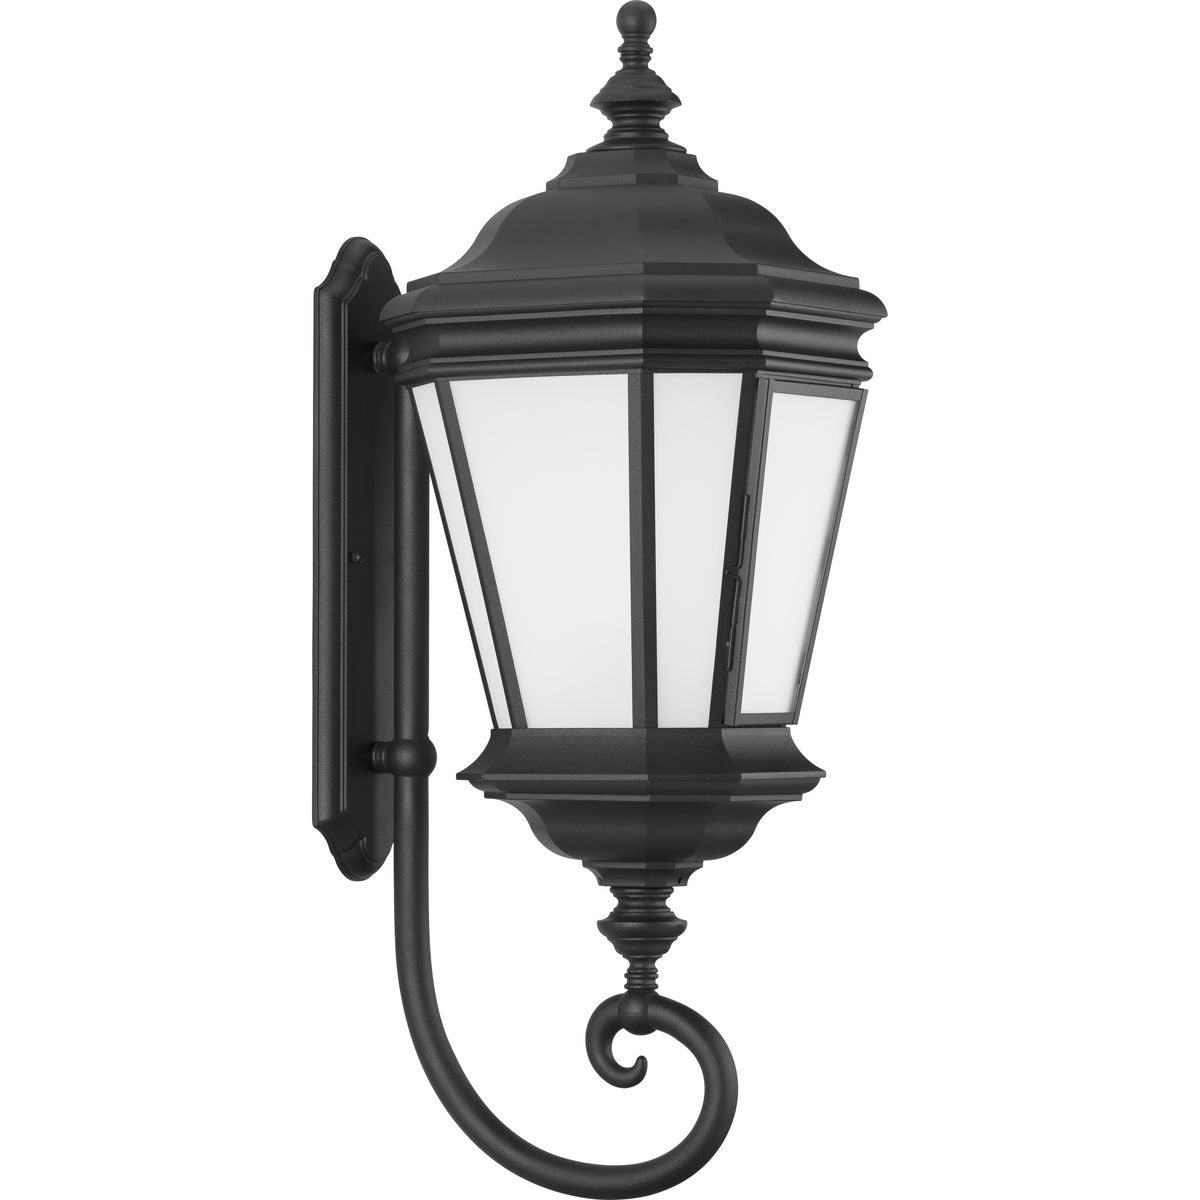 Crawford Outdoor Wall Light